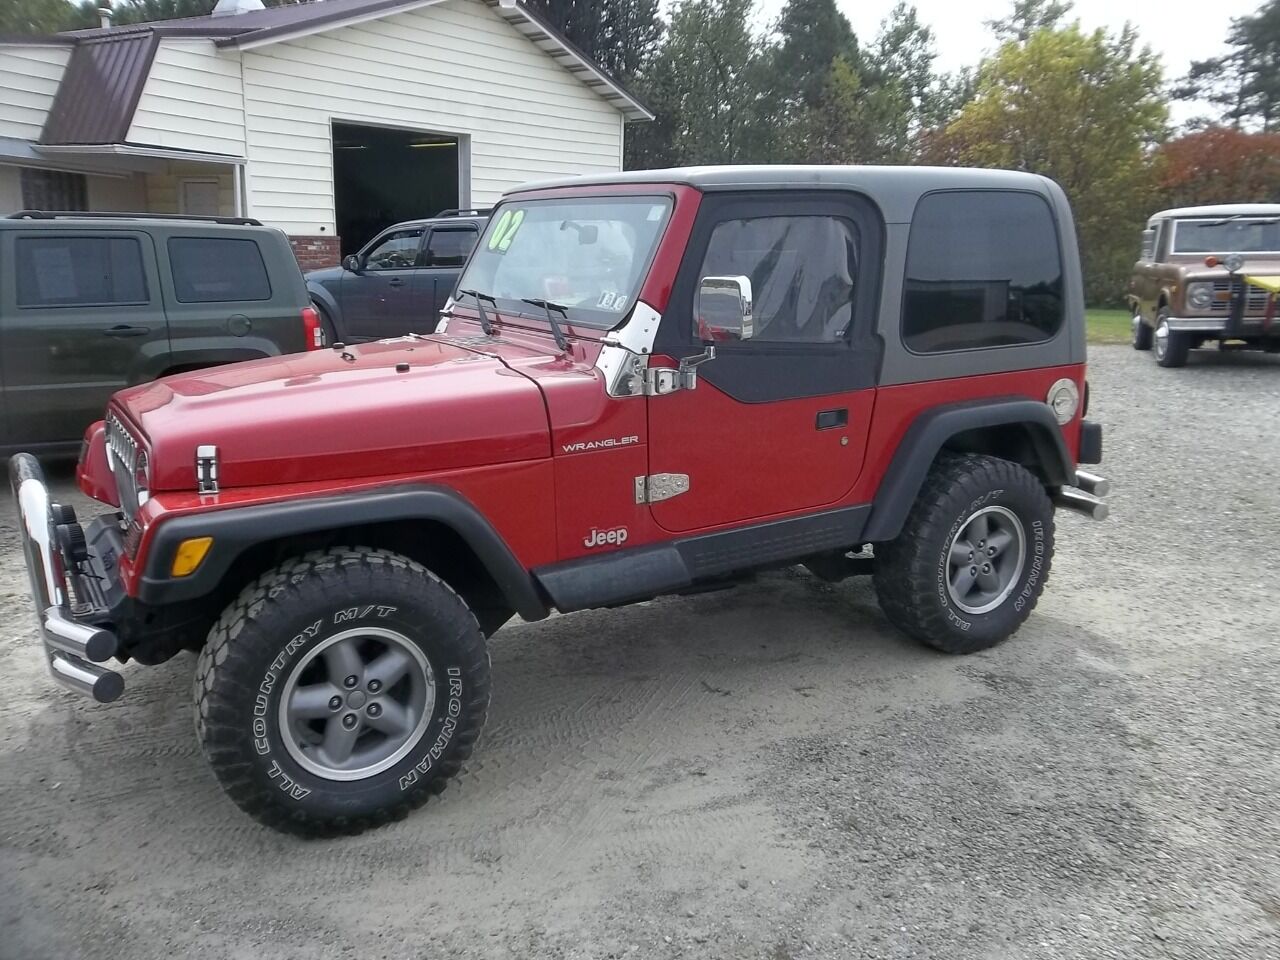 2002 Jeep Wrangler For Sale In Corry, PA ®